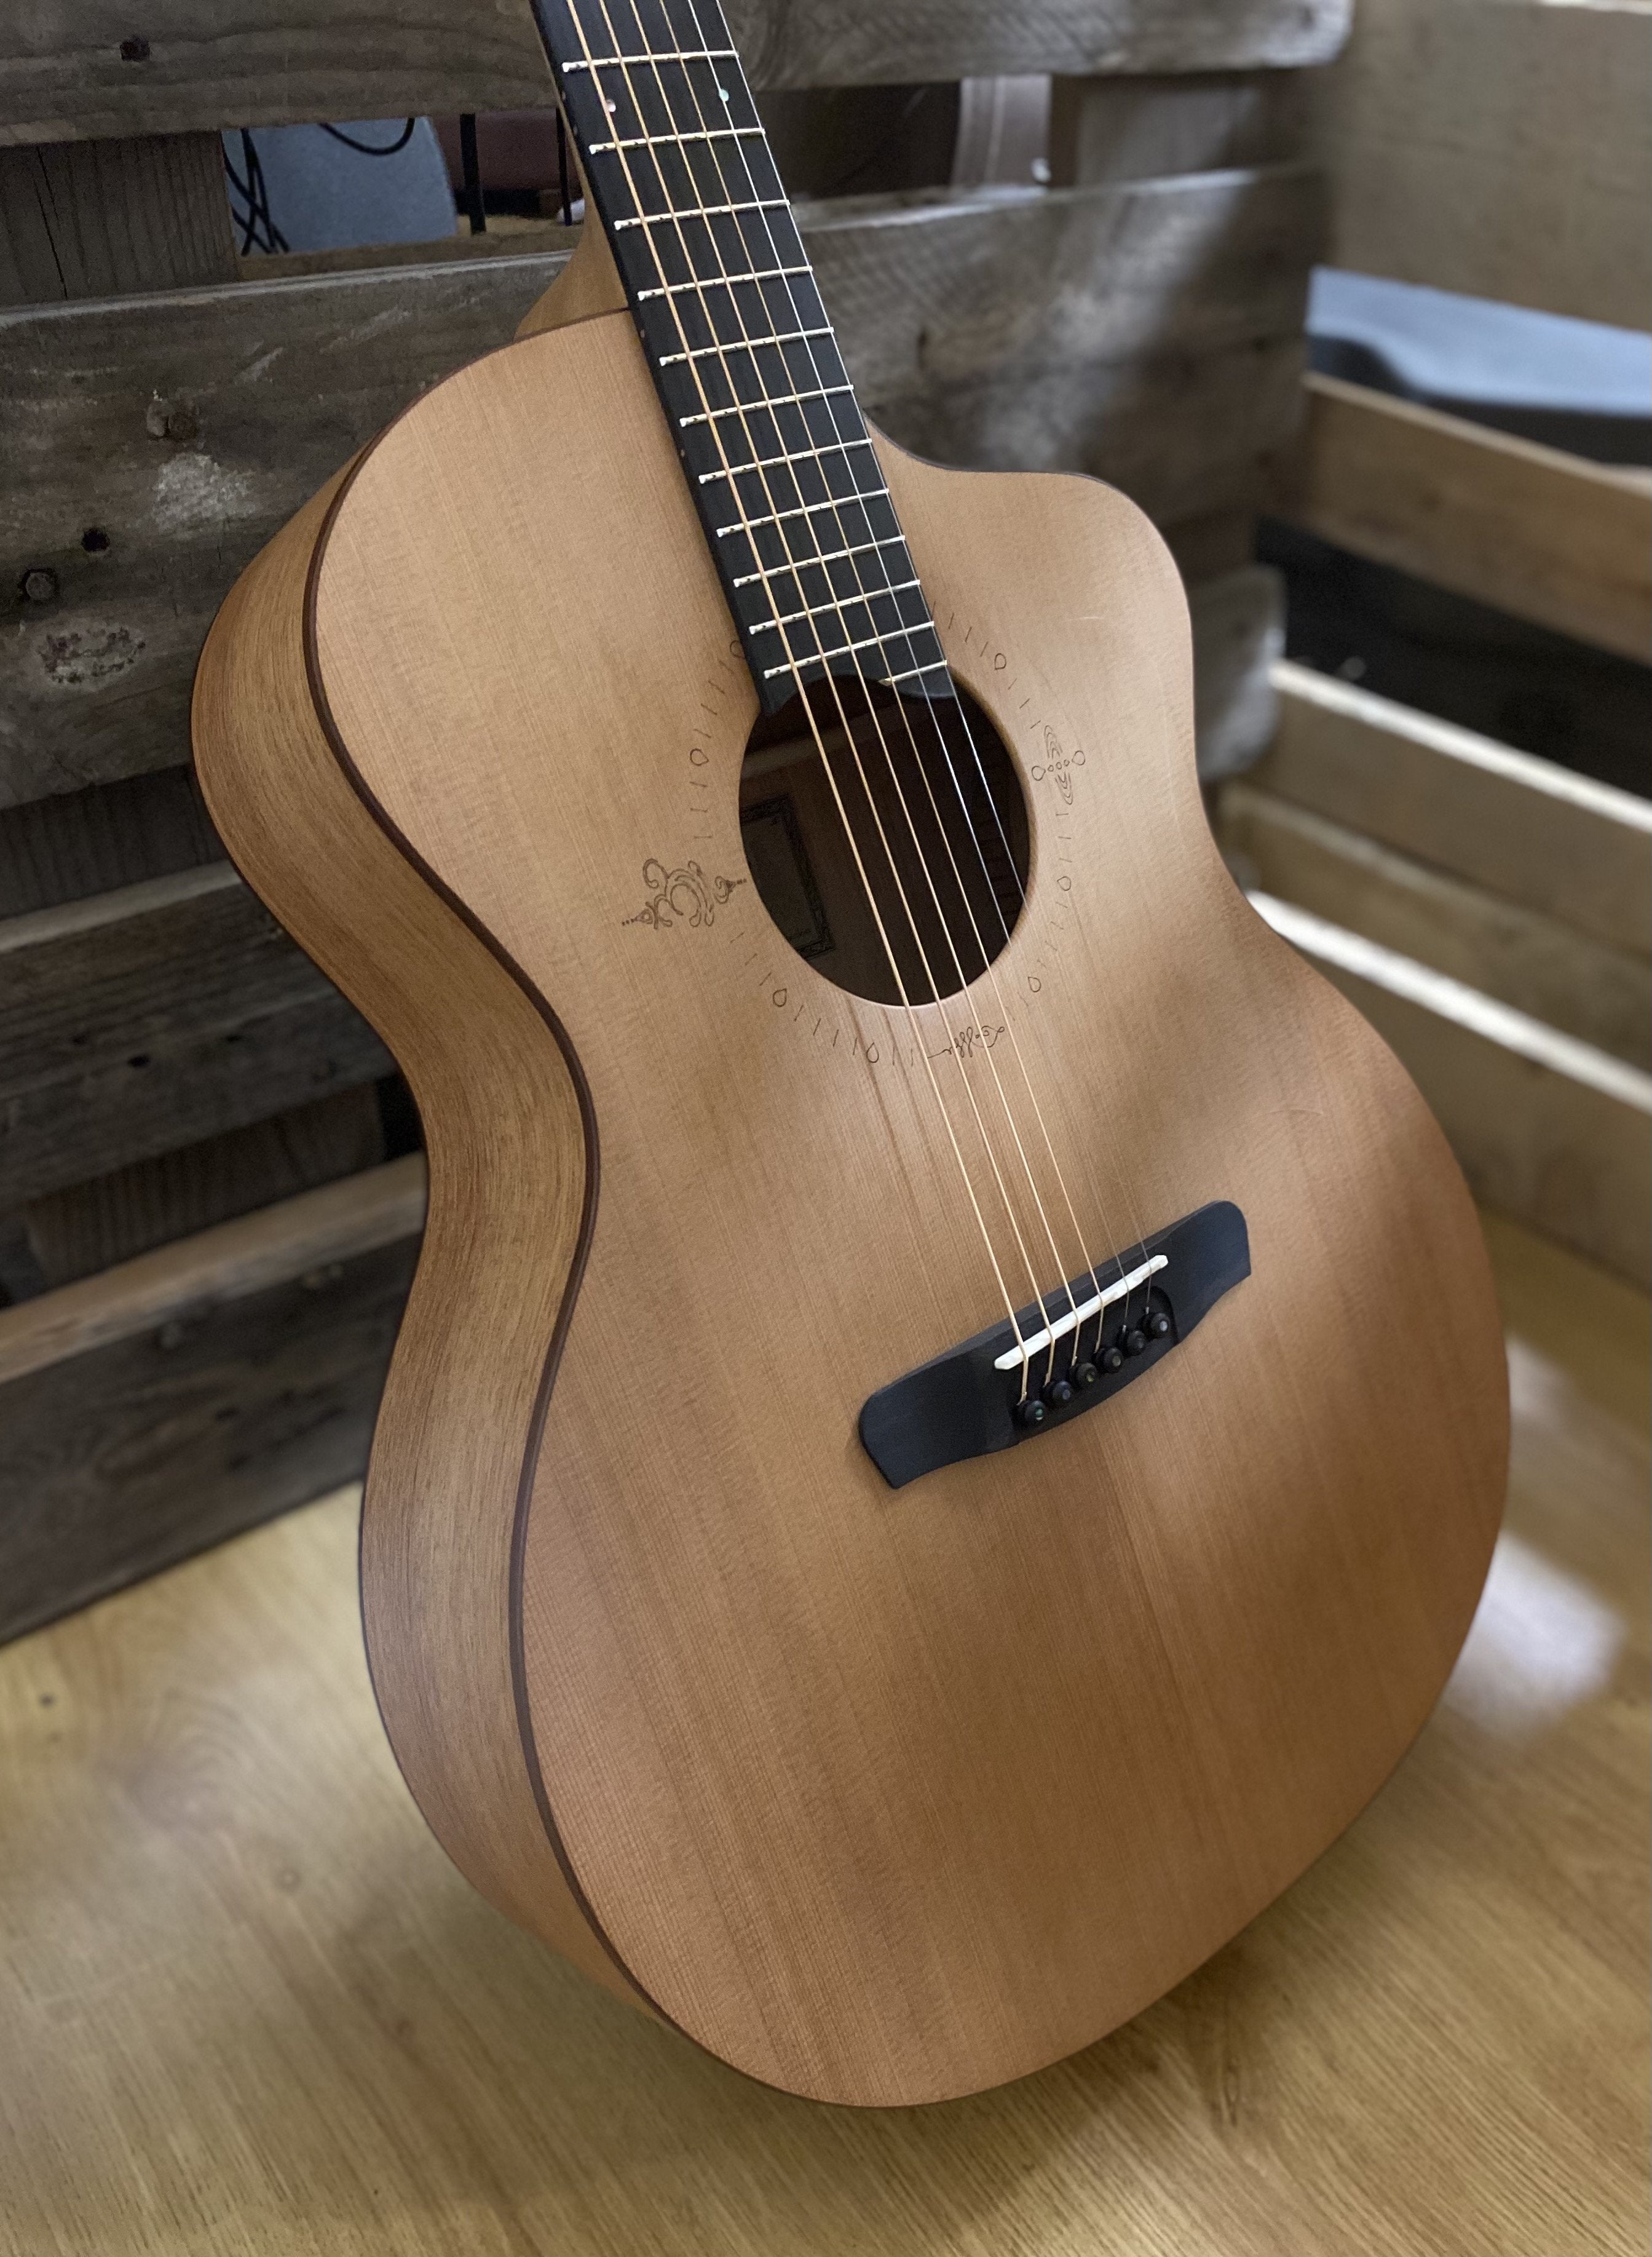 Dowina Pure GAC Left Handed - The Worlds Finest Value Hand Made Acoustic Guitar?, Acoustic Guitar for sale at Richards Guitars.